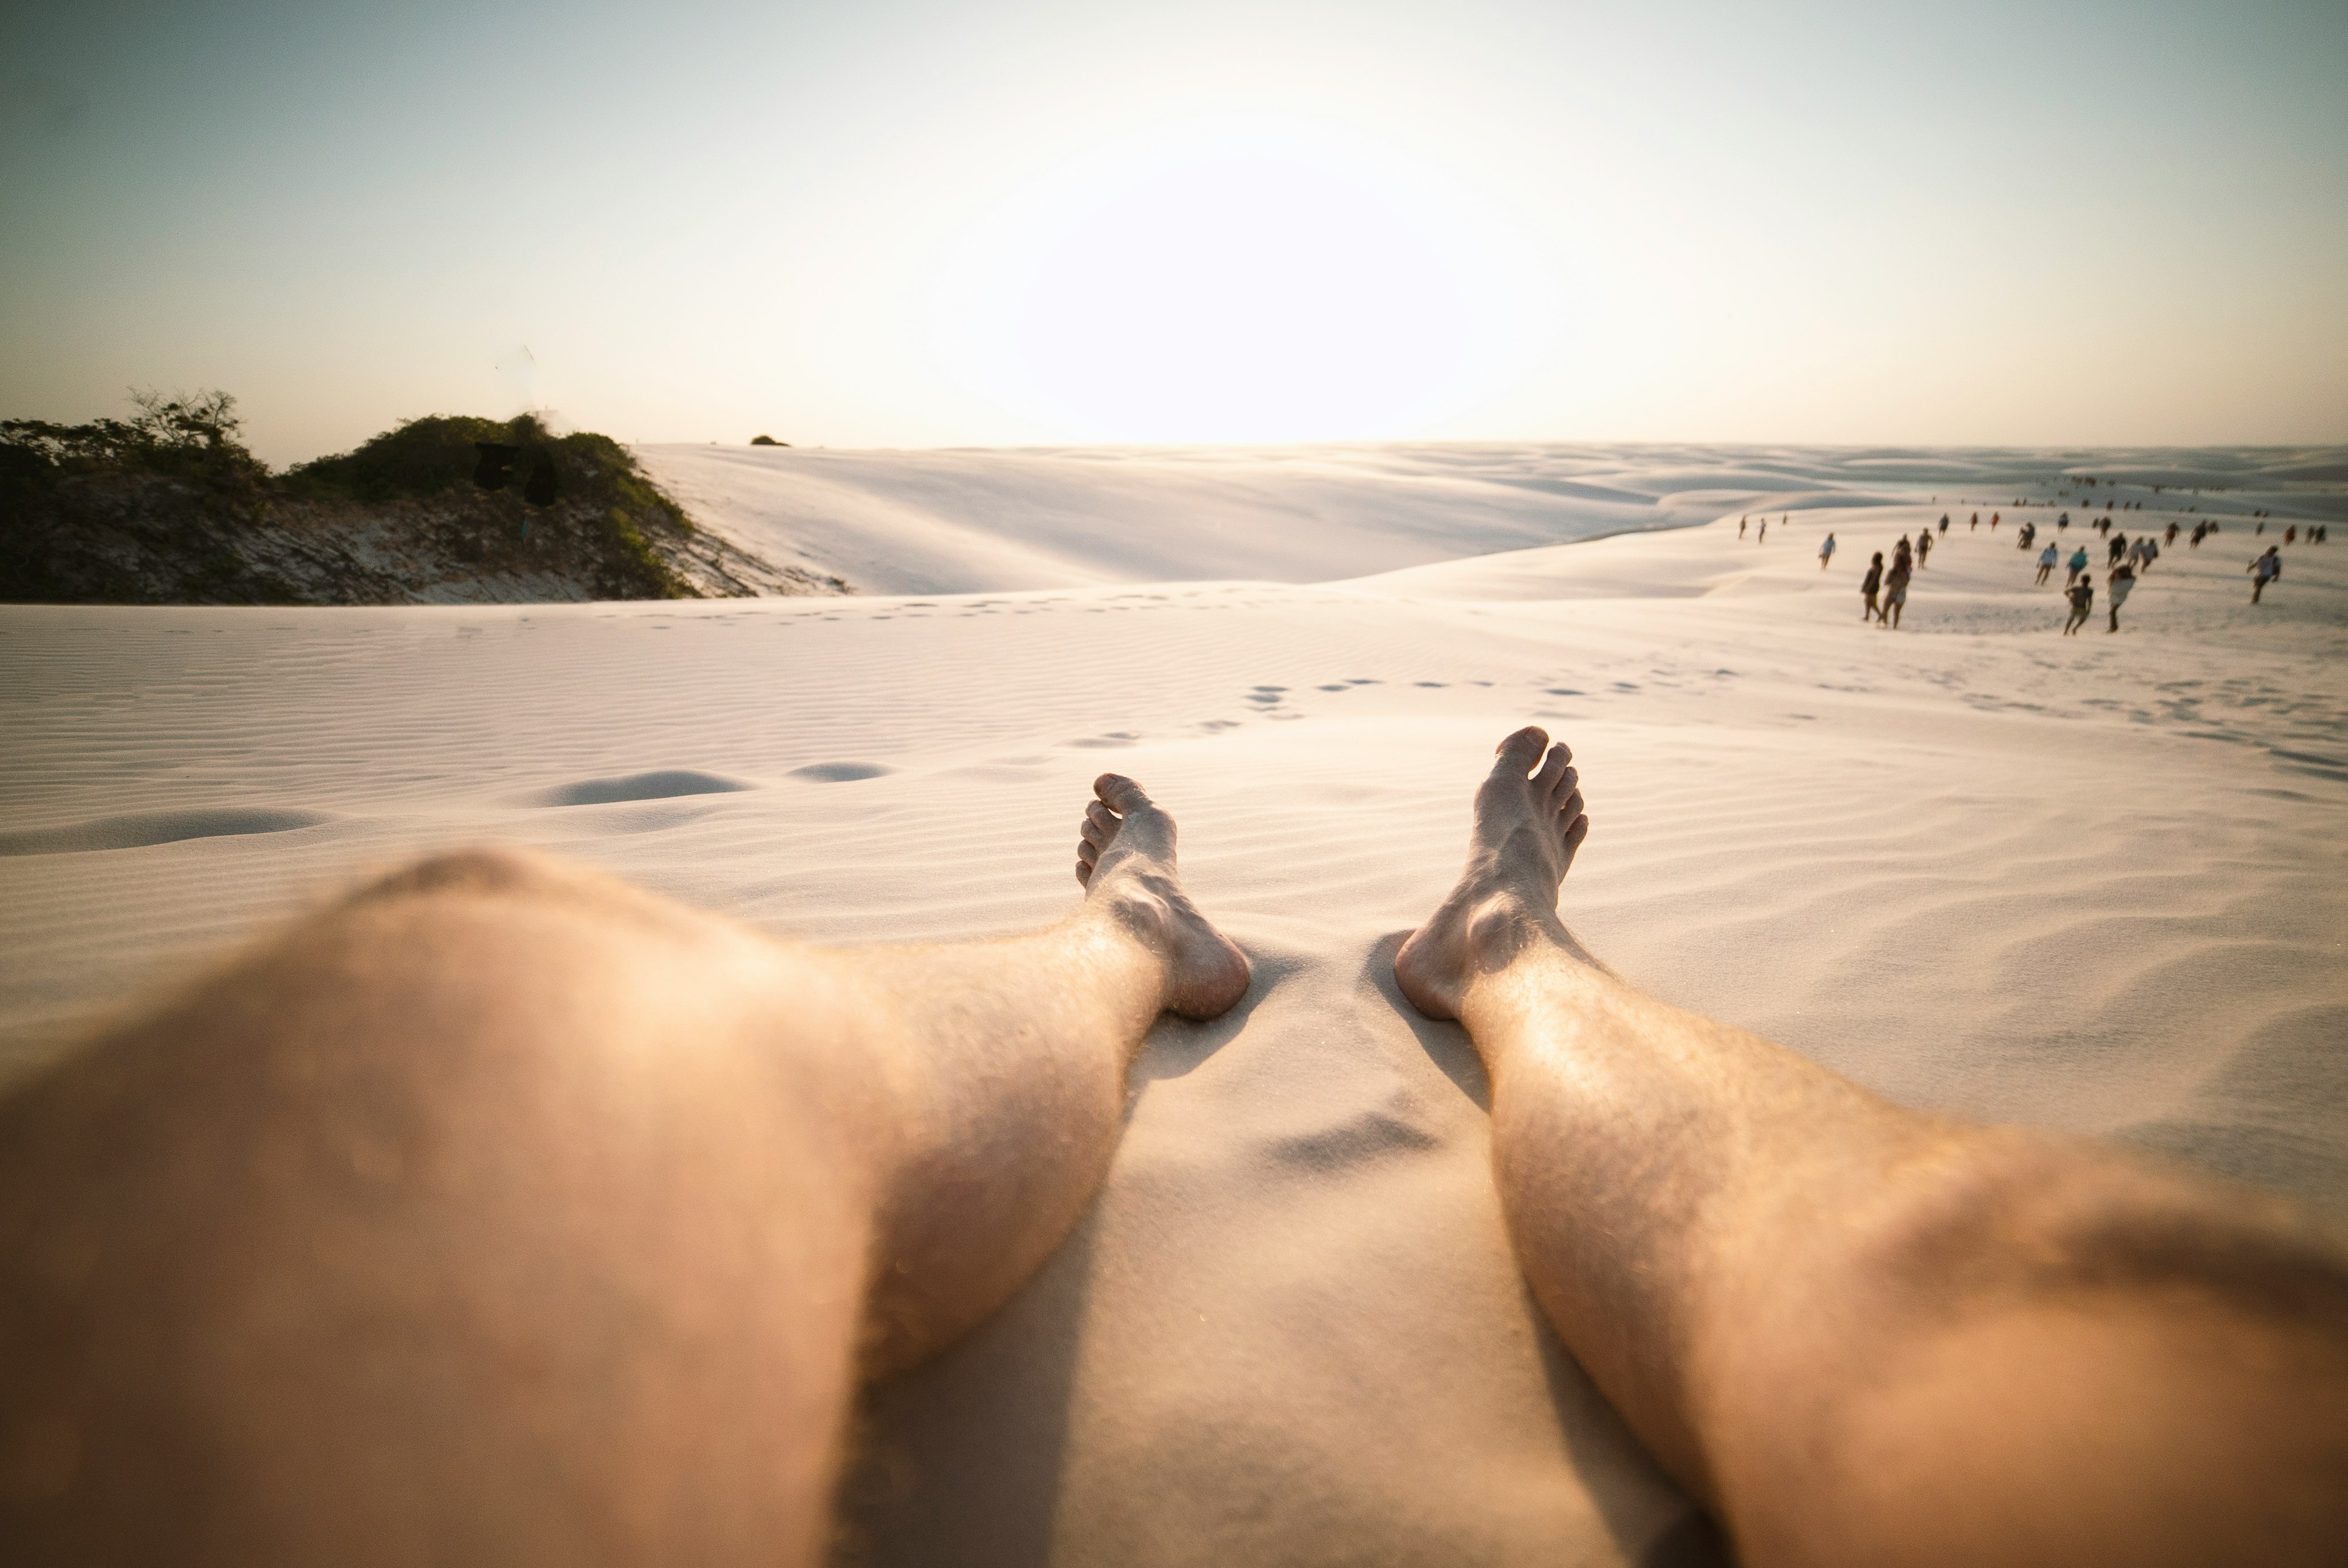 low-angle view of person's feet on sand